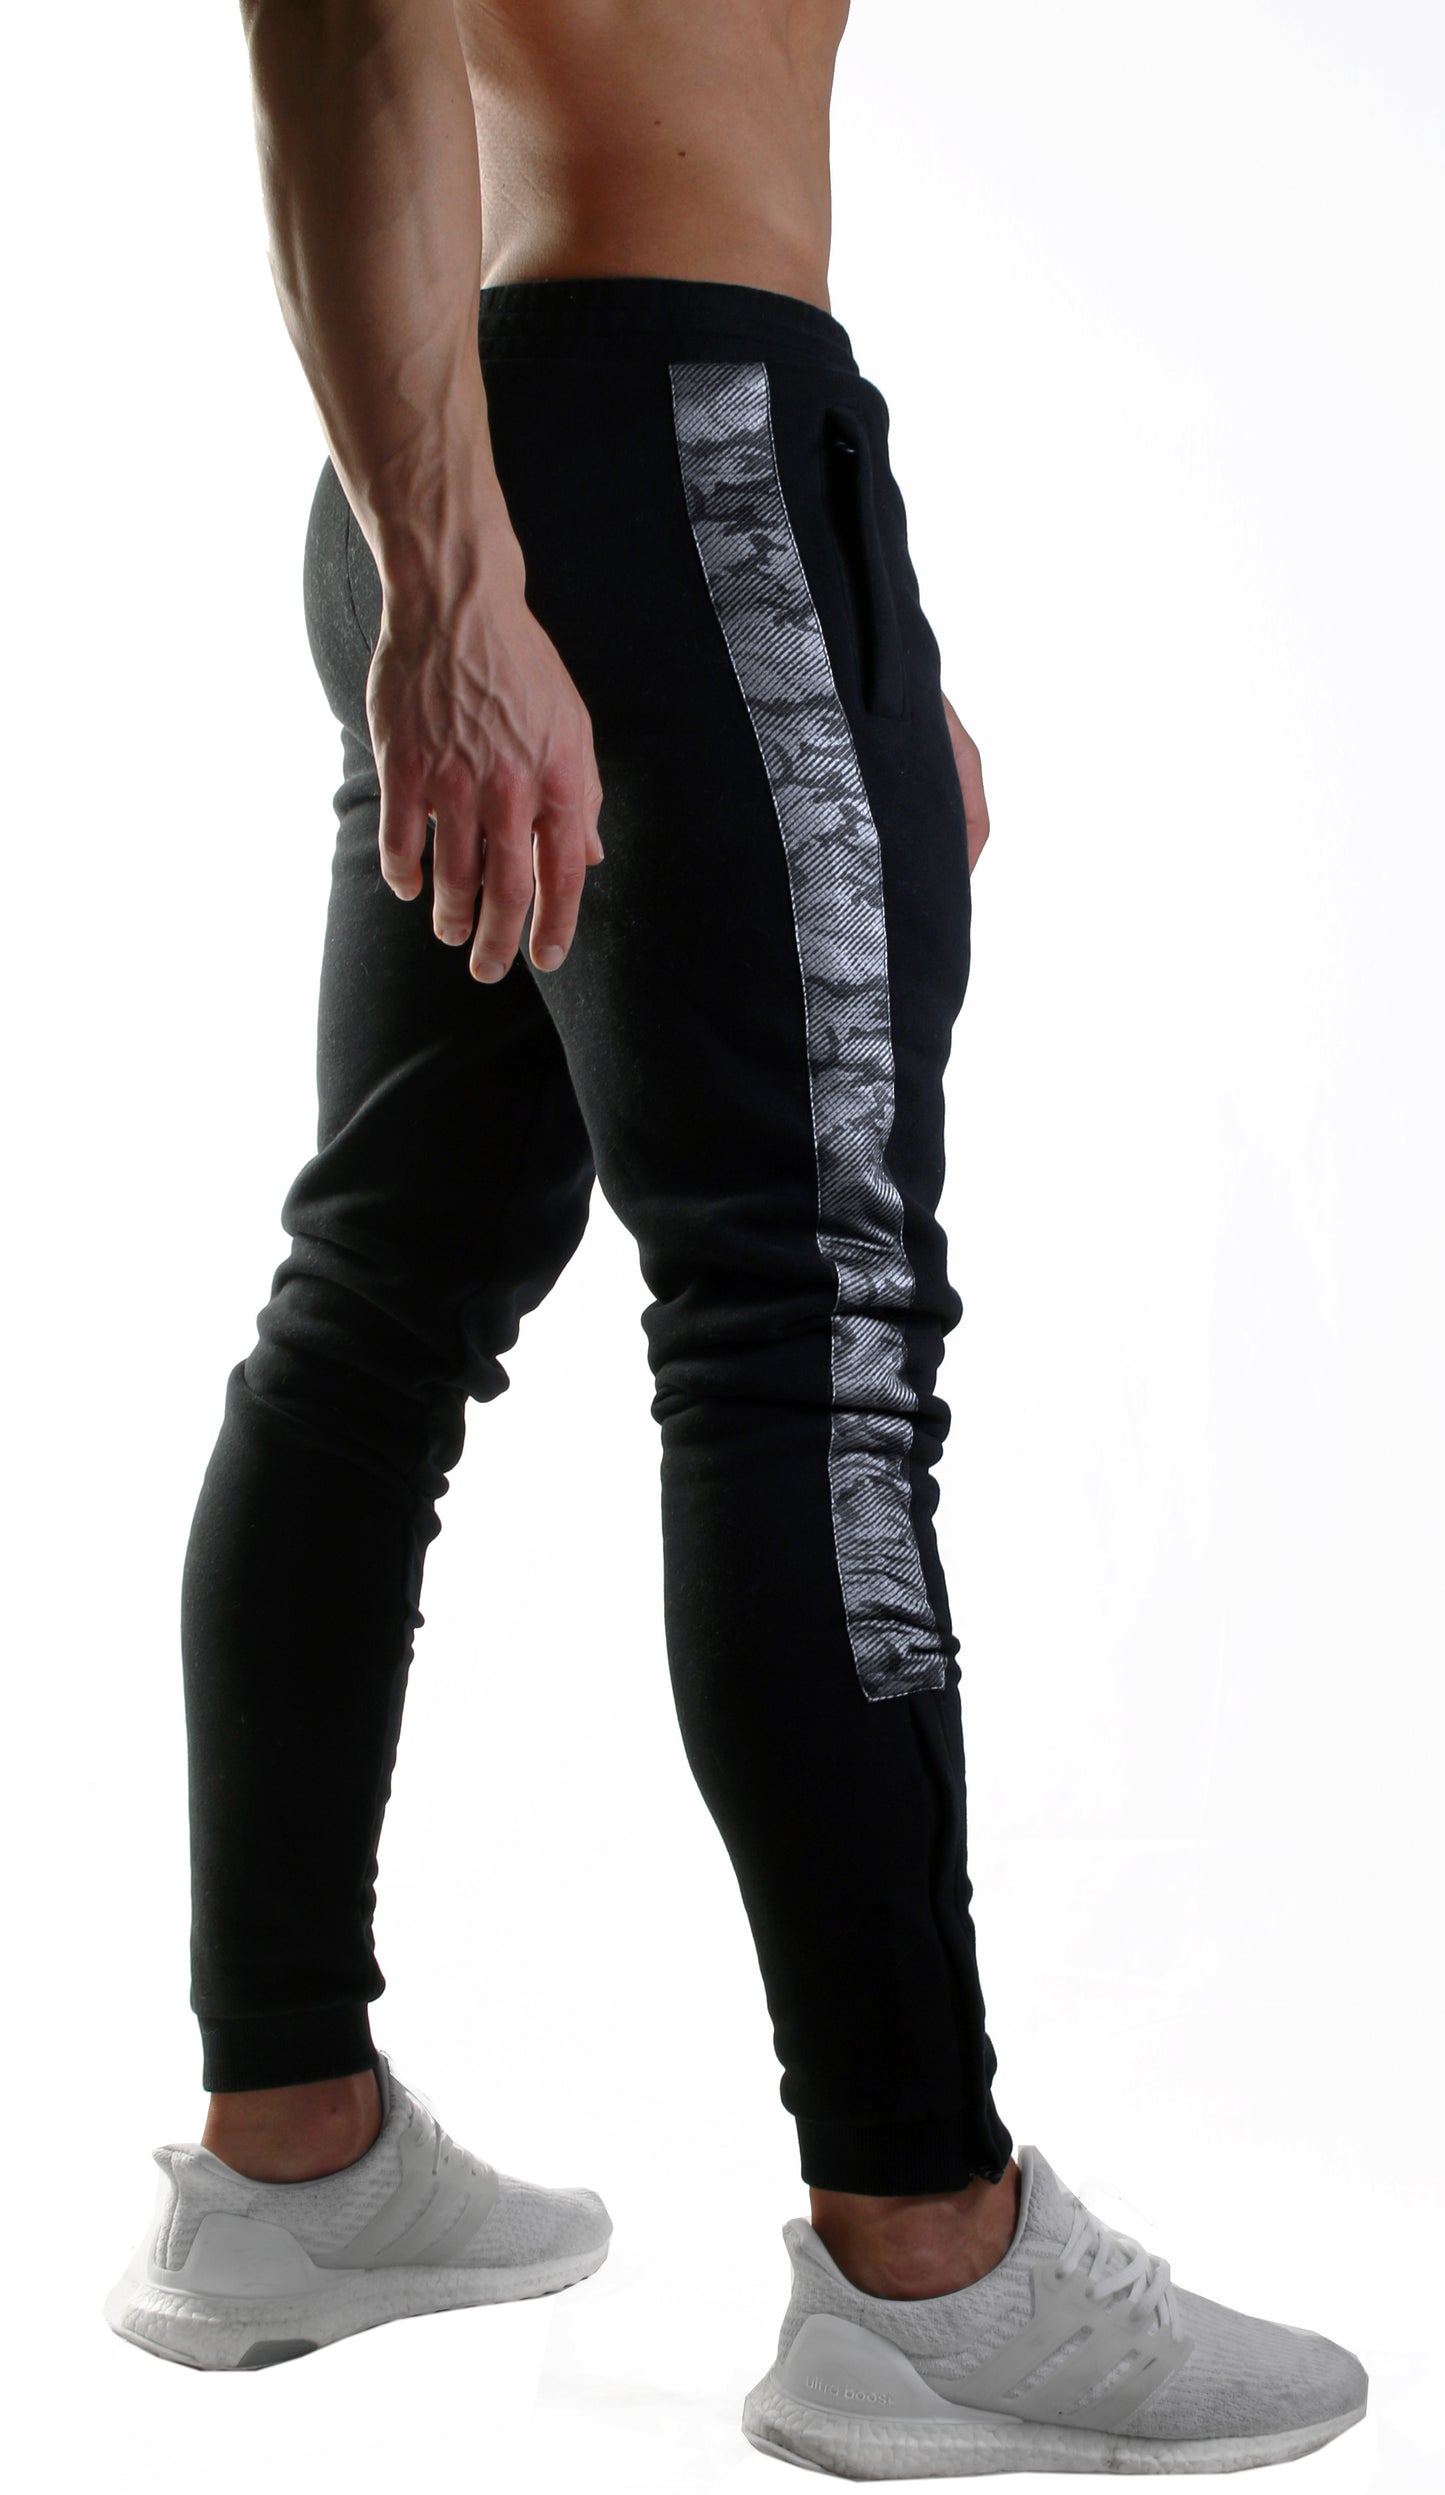 Alpha Fitness Pants with gray camo stripes